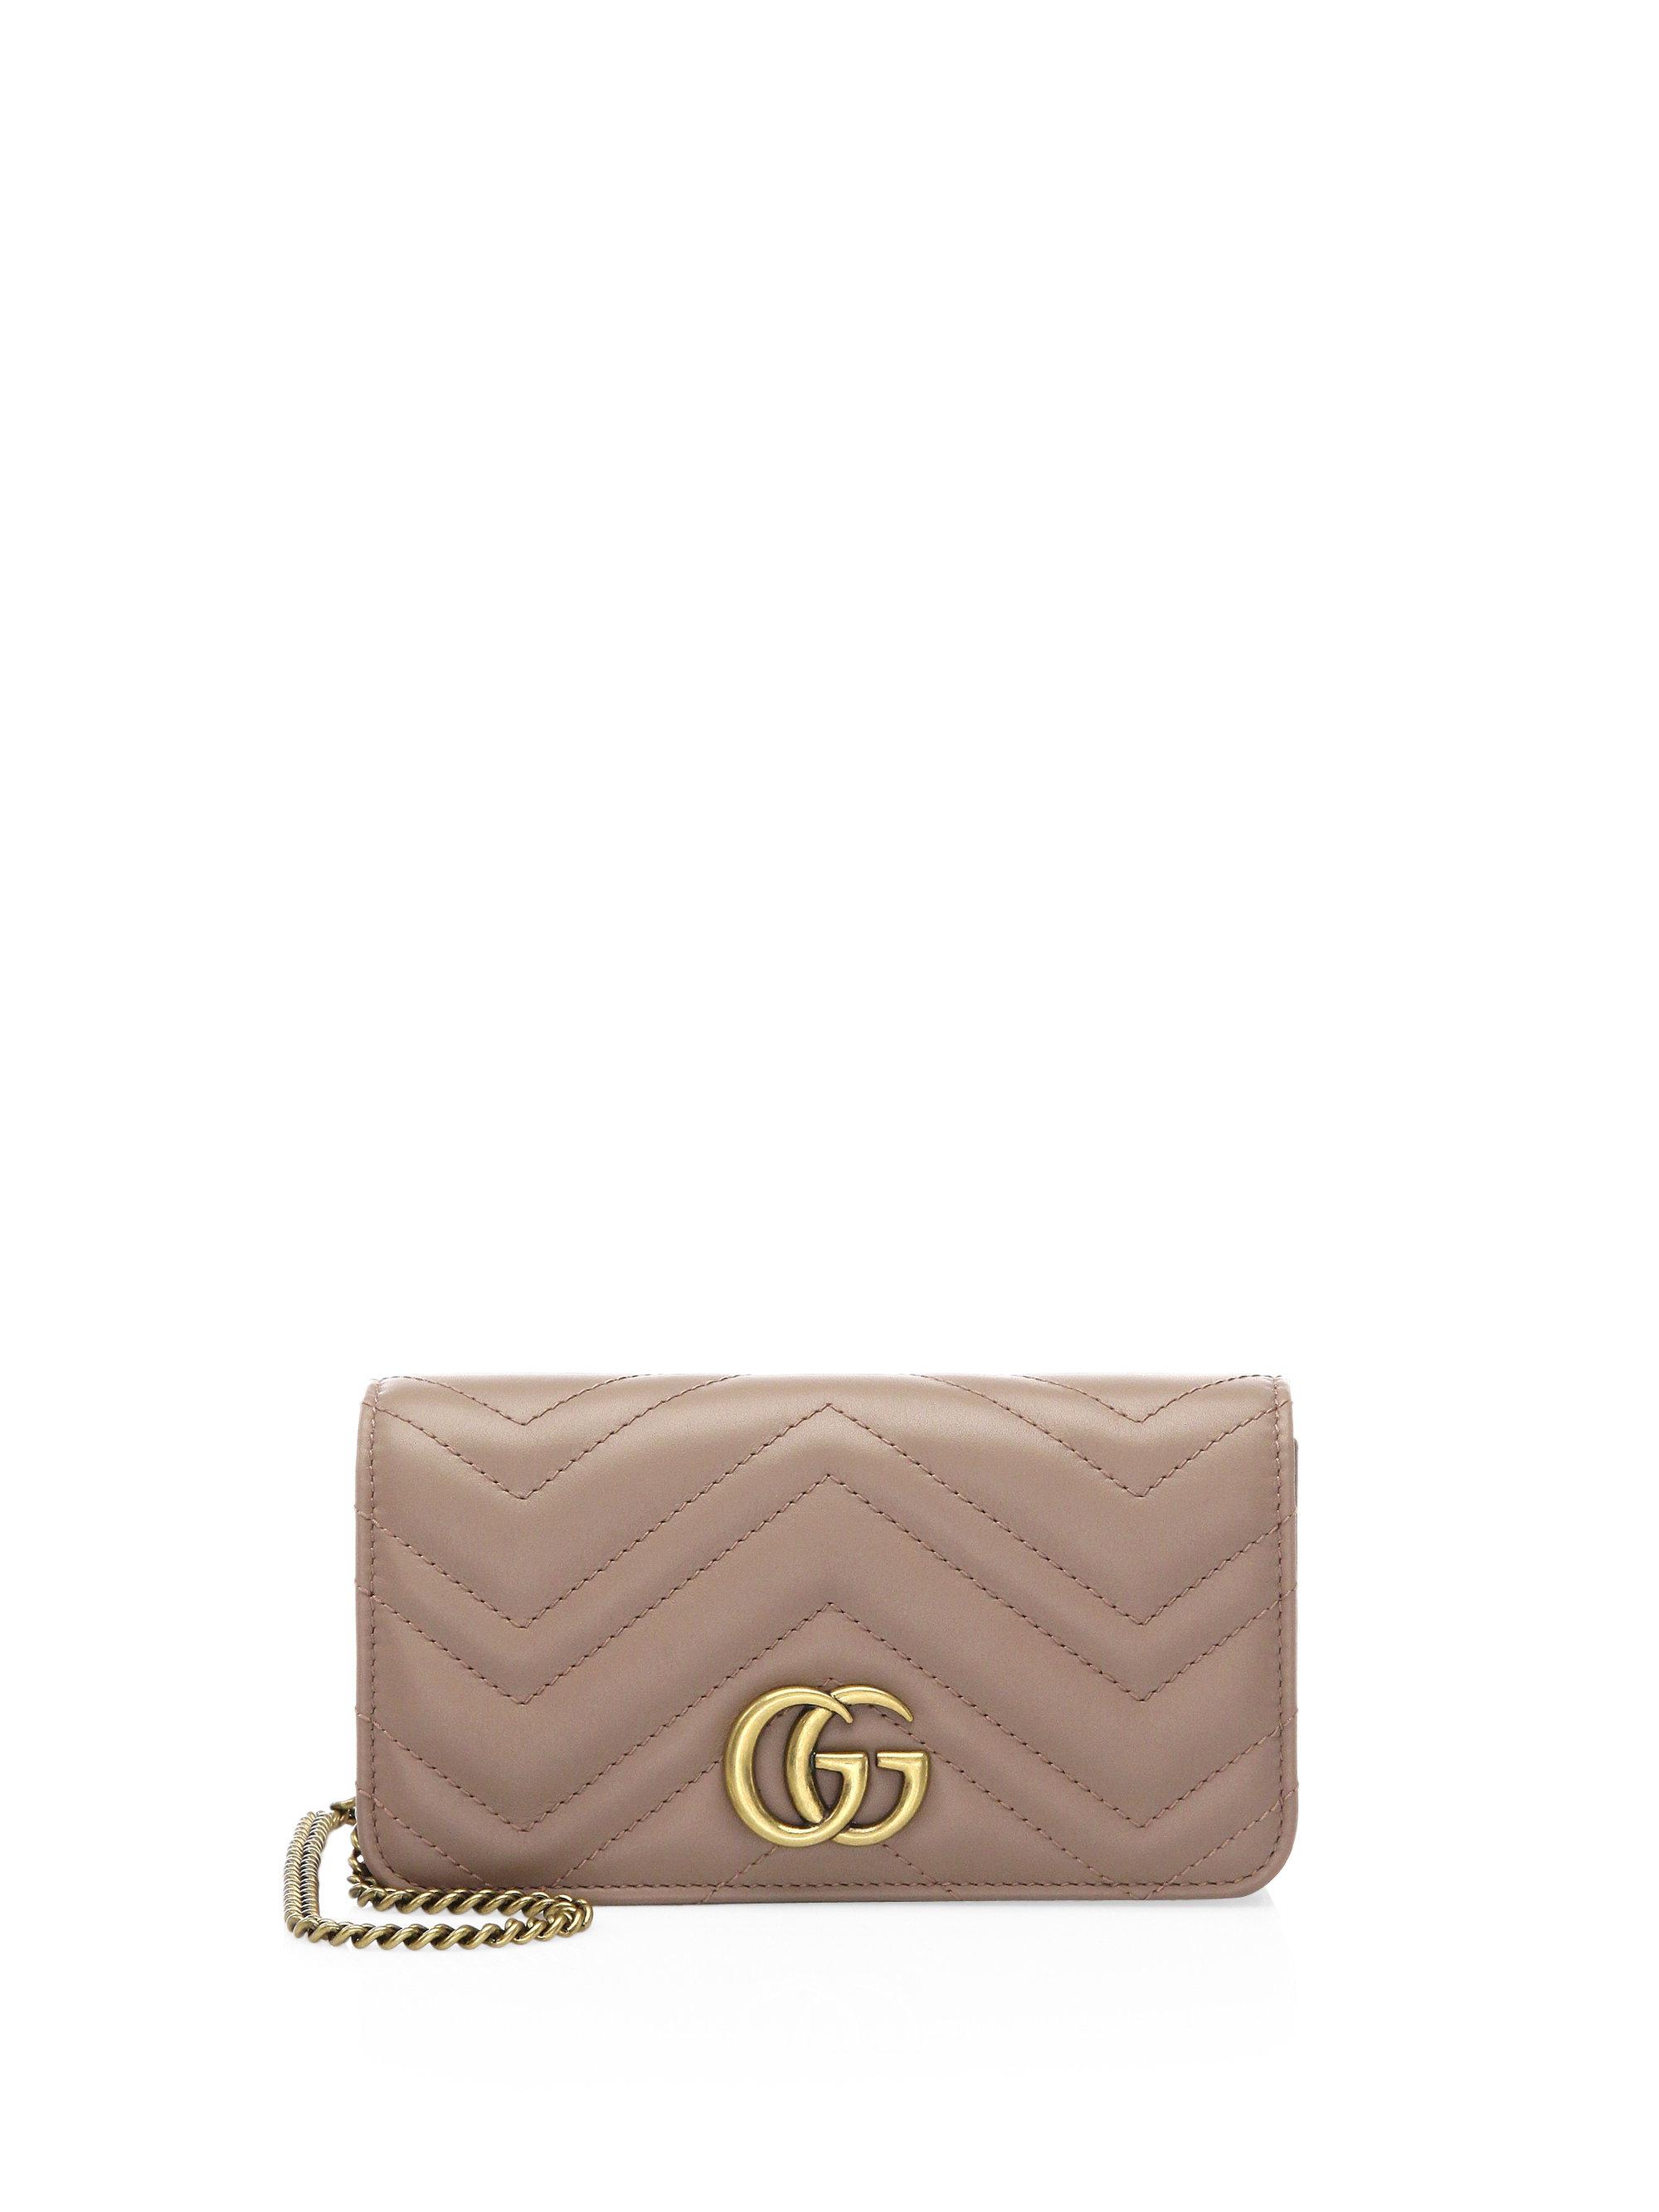 gucci marmont 2.0 leather crossbody bag